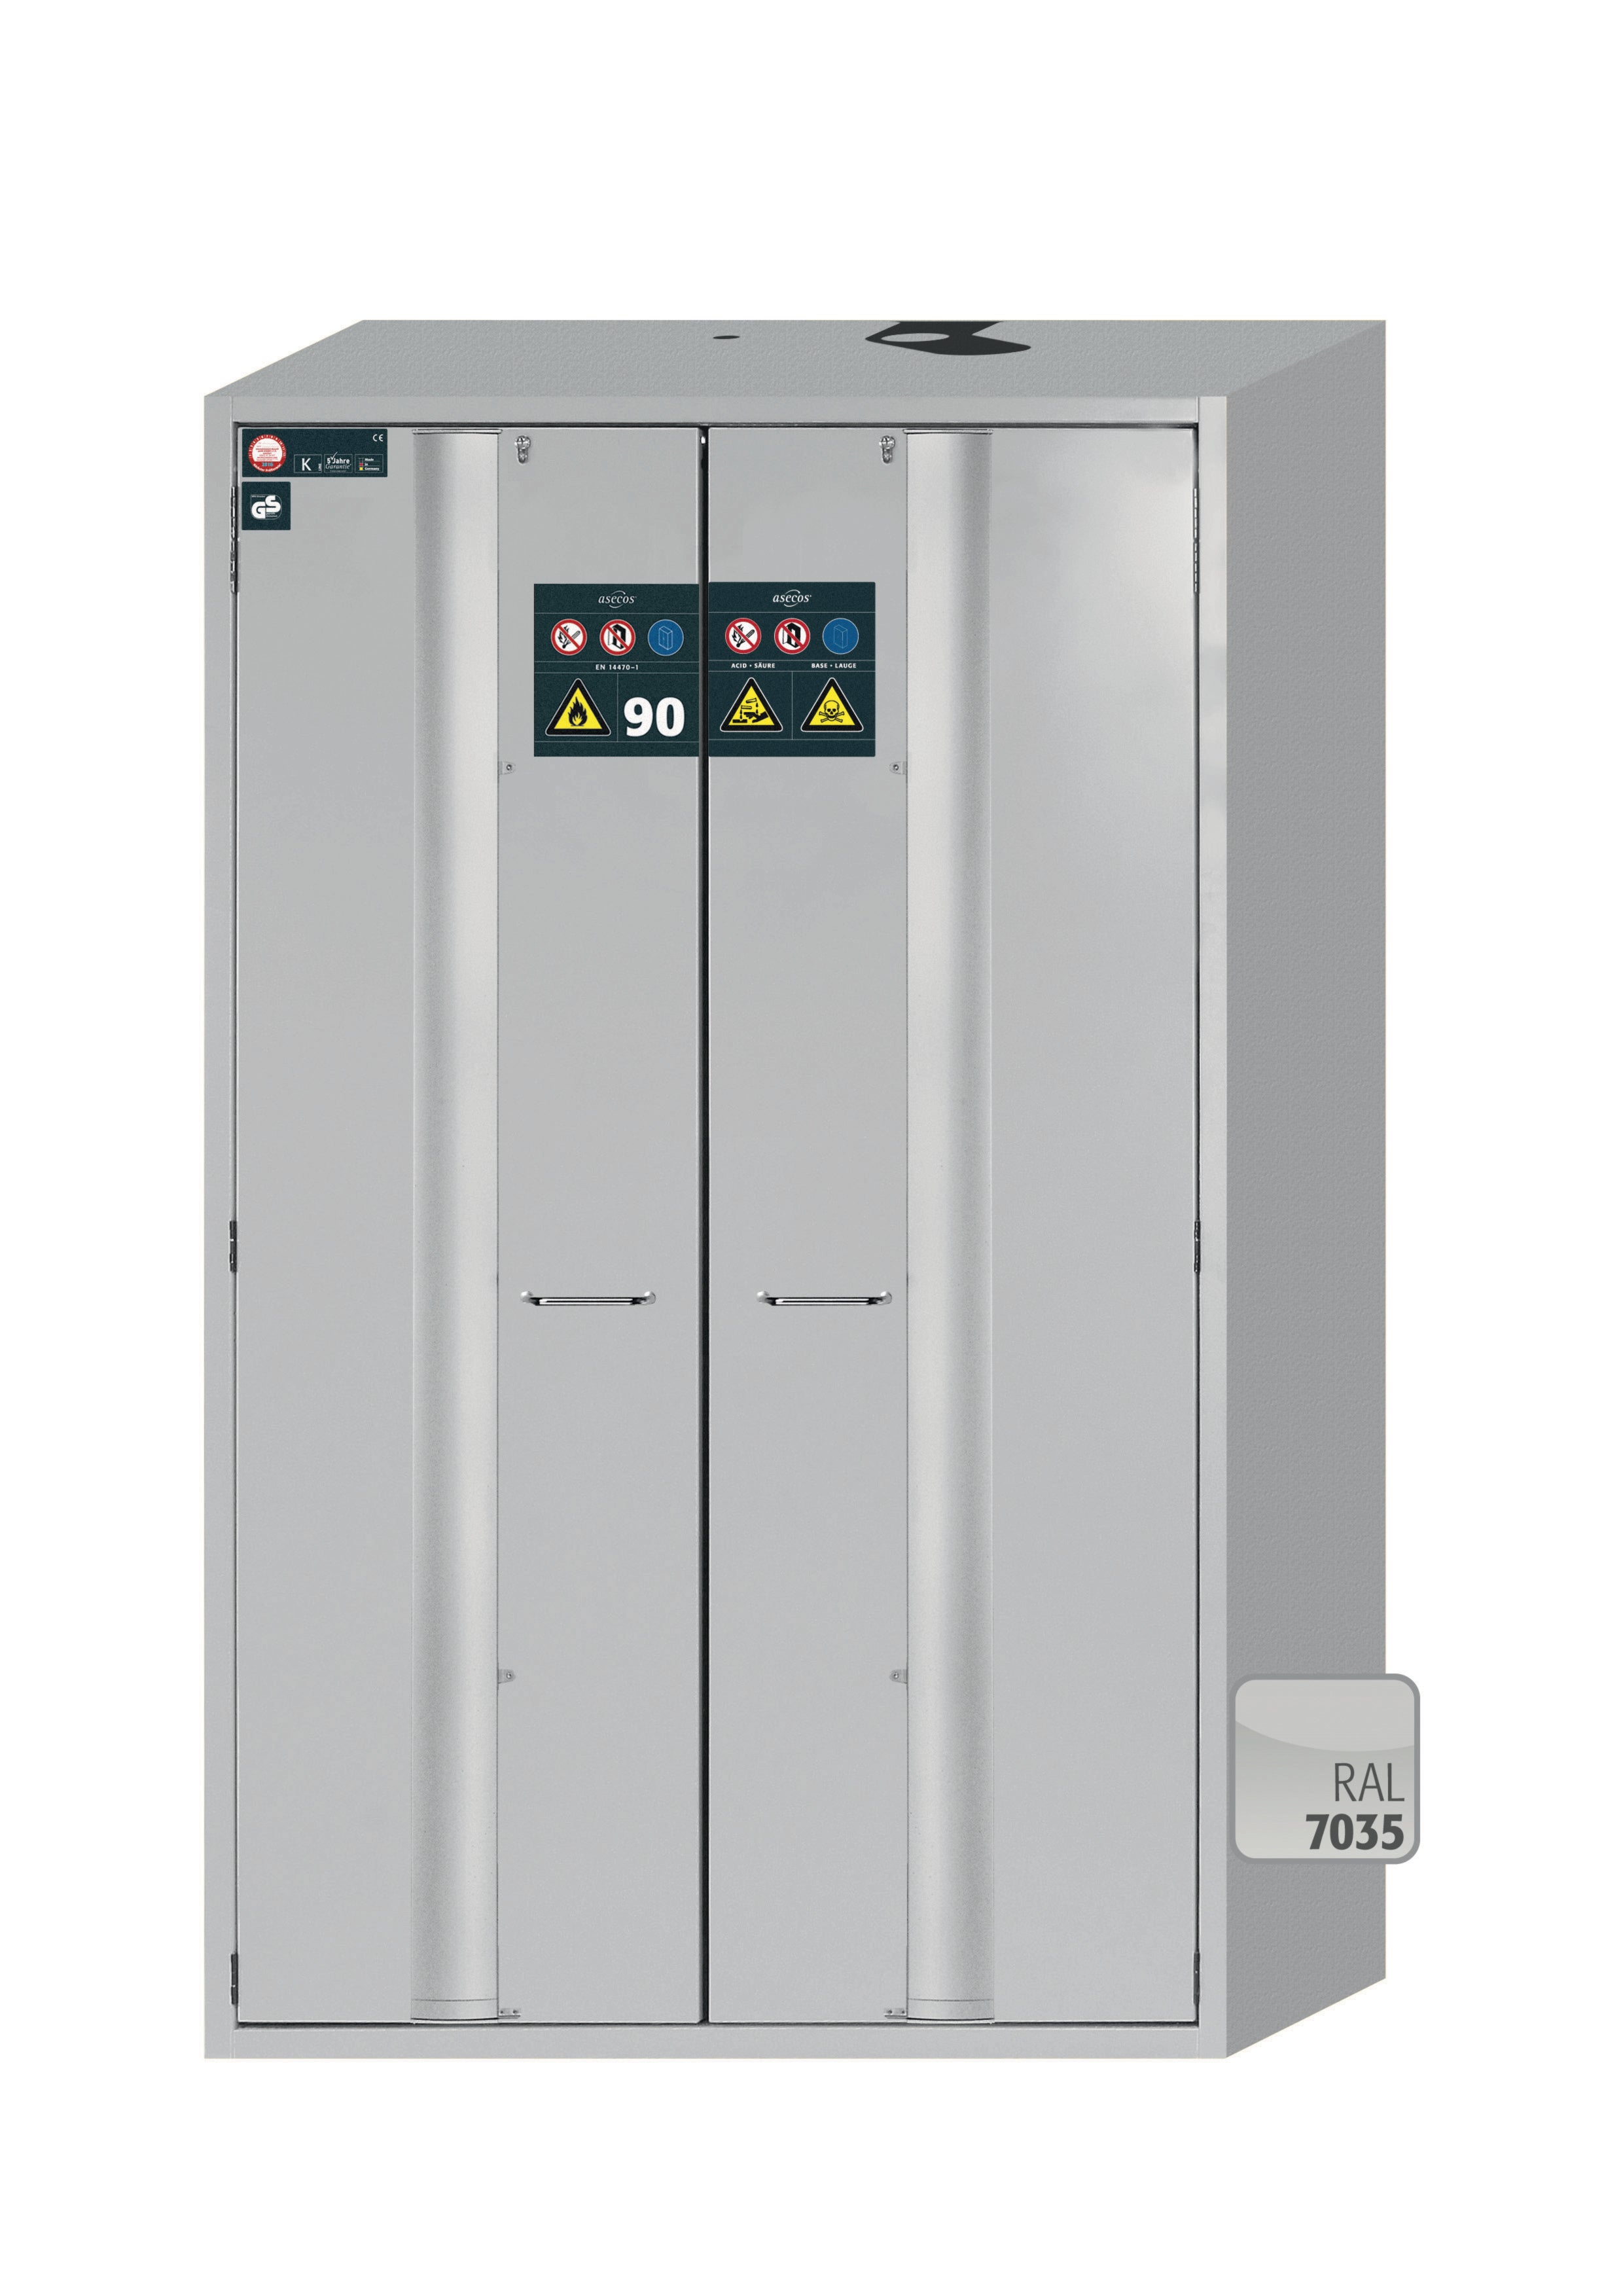 Type 90 safety cabinet S-PHOENIX-90 model S90.196.120.MV.FDAS in light gray RAL 7035 with 6x standard shelves (stainless steel 1.4301)